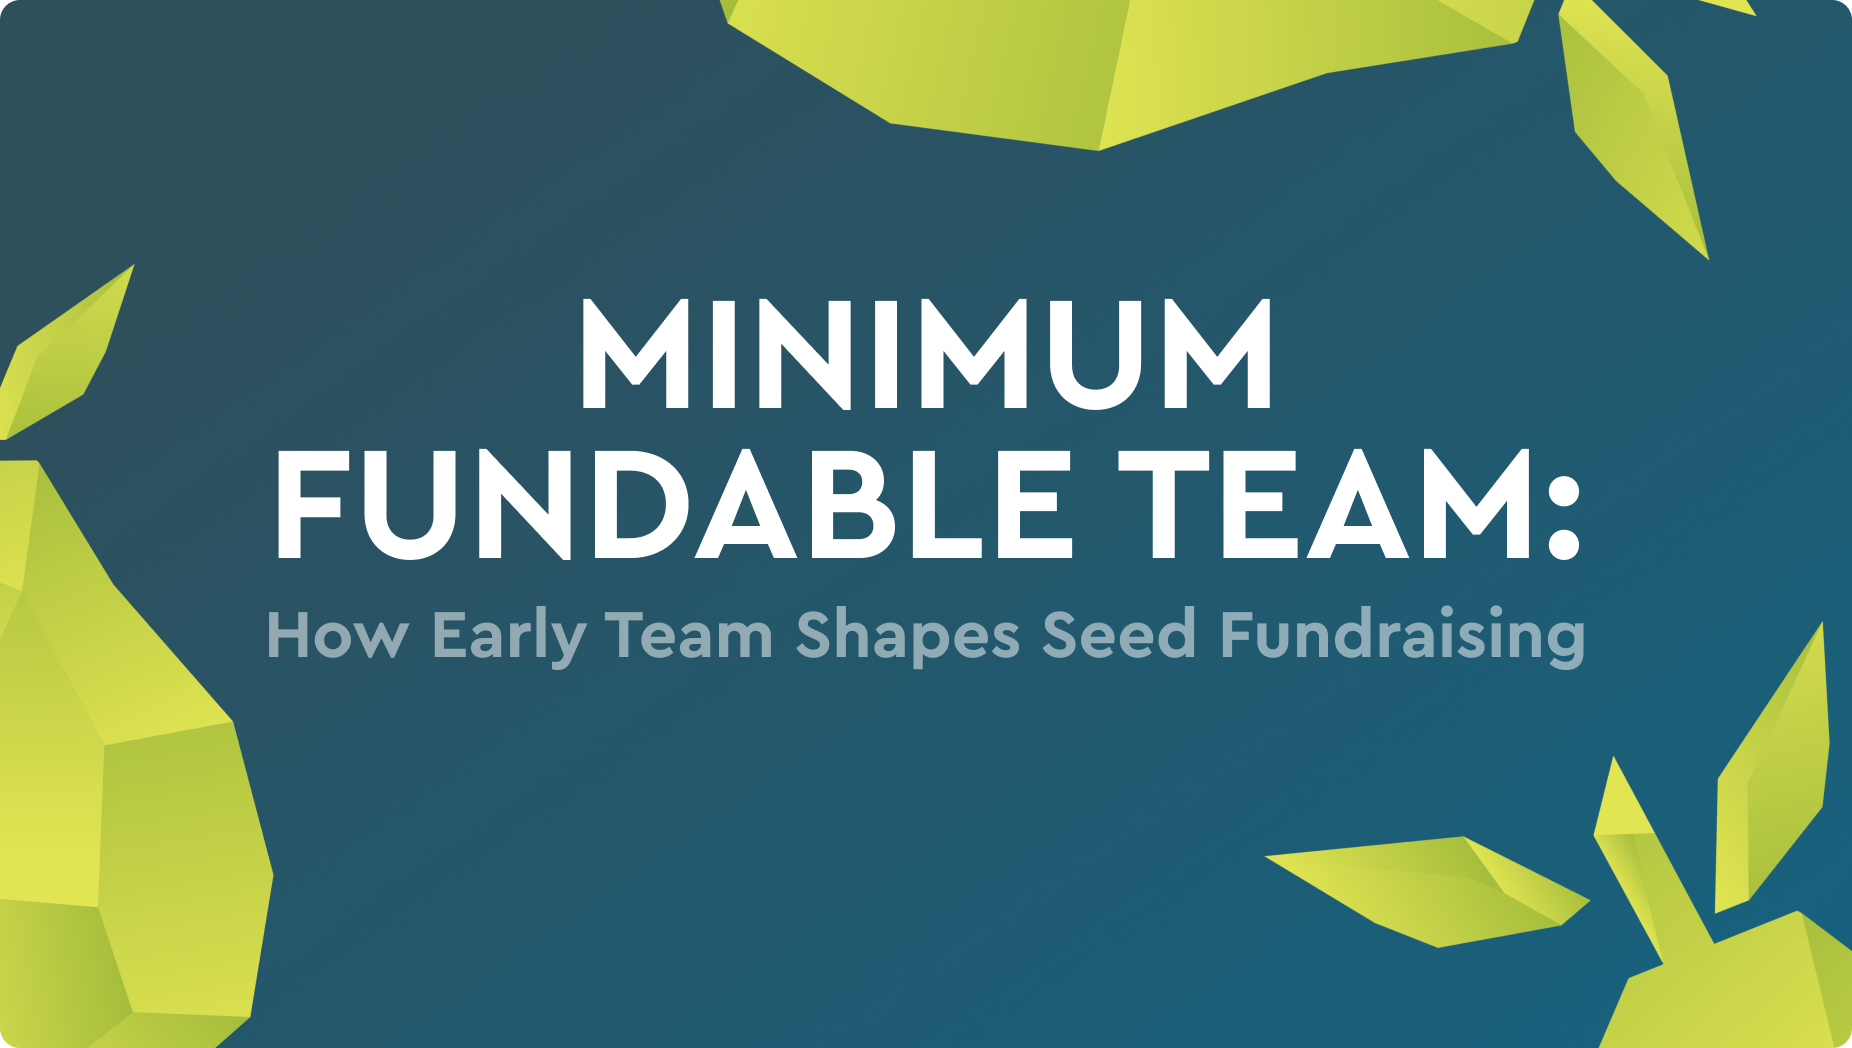 Minimum Fundable Team: how early team shapes seed fundraising